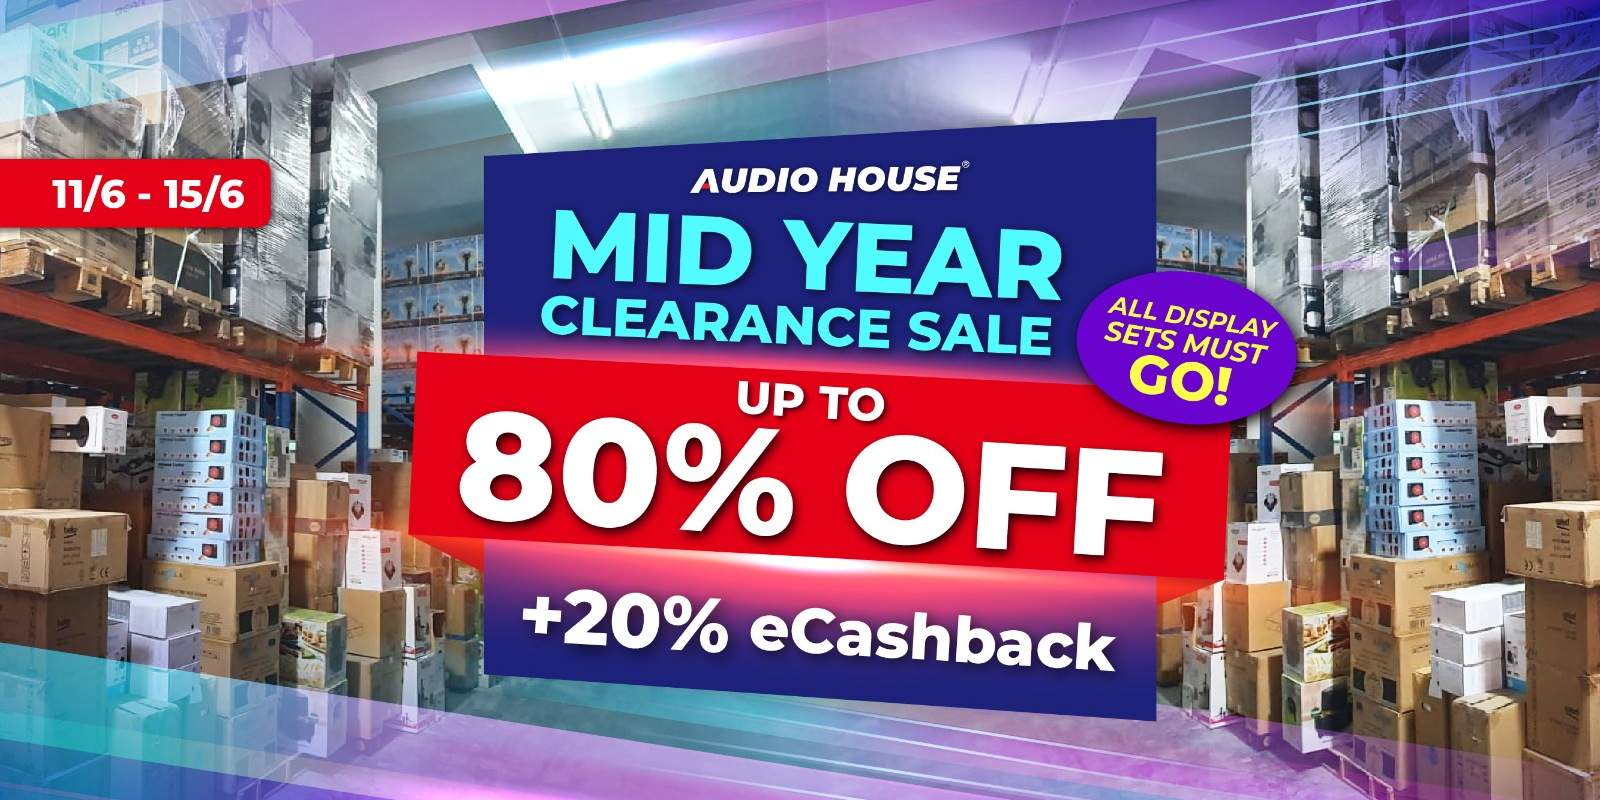 [Audio House Mid-Year Clearance Sale] Get Up to 80% OFF + Extra 20% eCashback with Every $100 Spent!